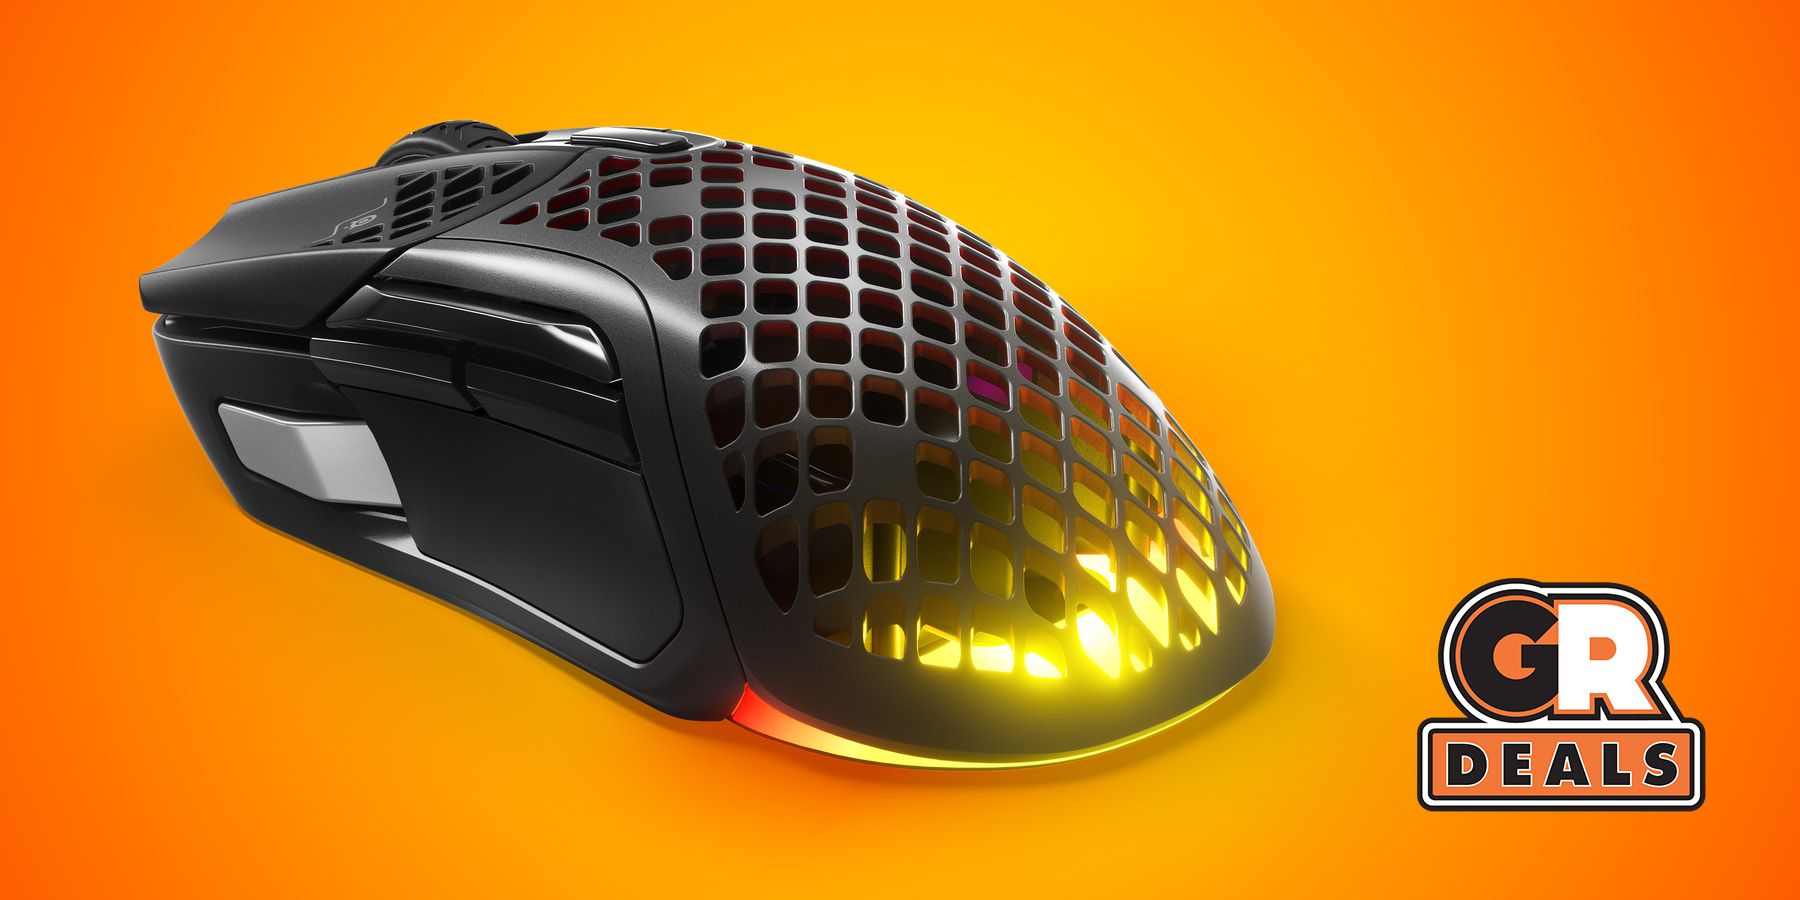 Save $30 on the SteelSeries Aerox 5 Wireless Gaming Mouse Now